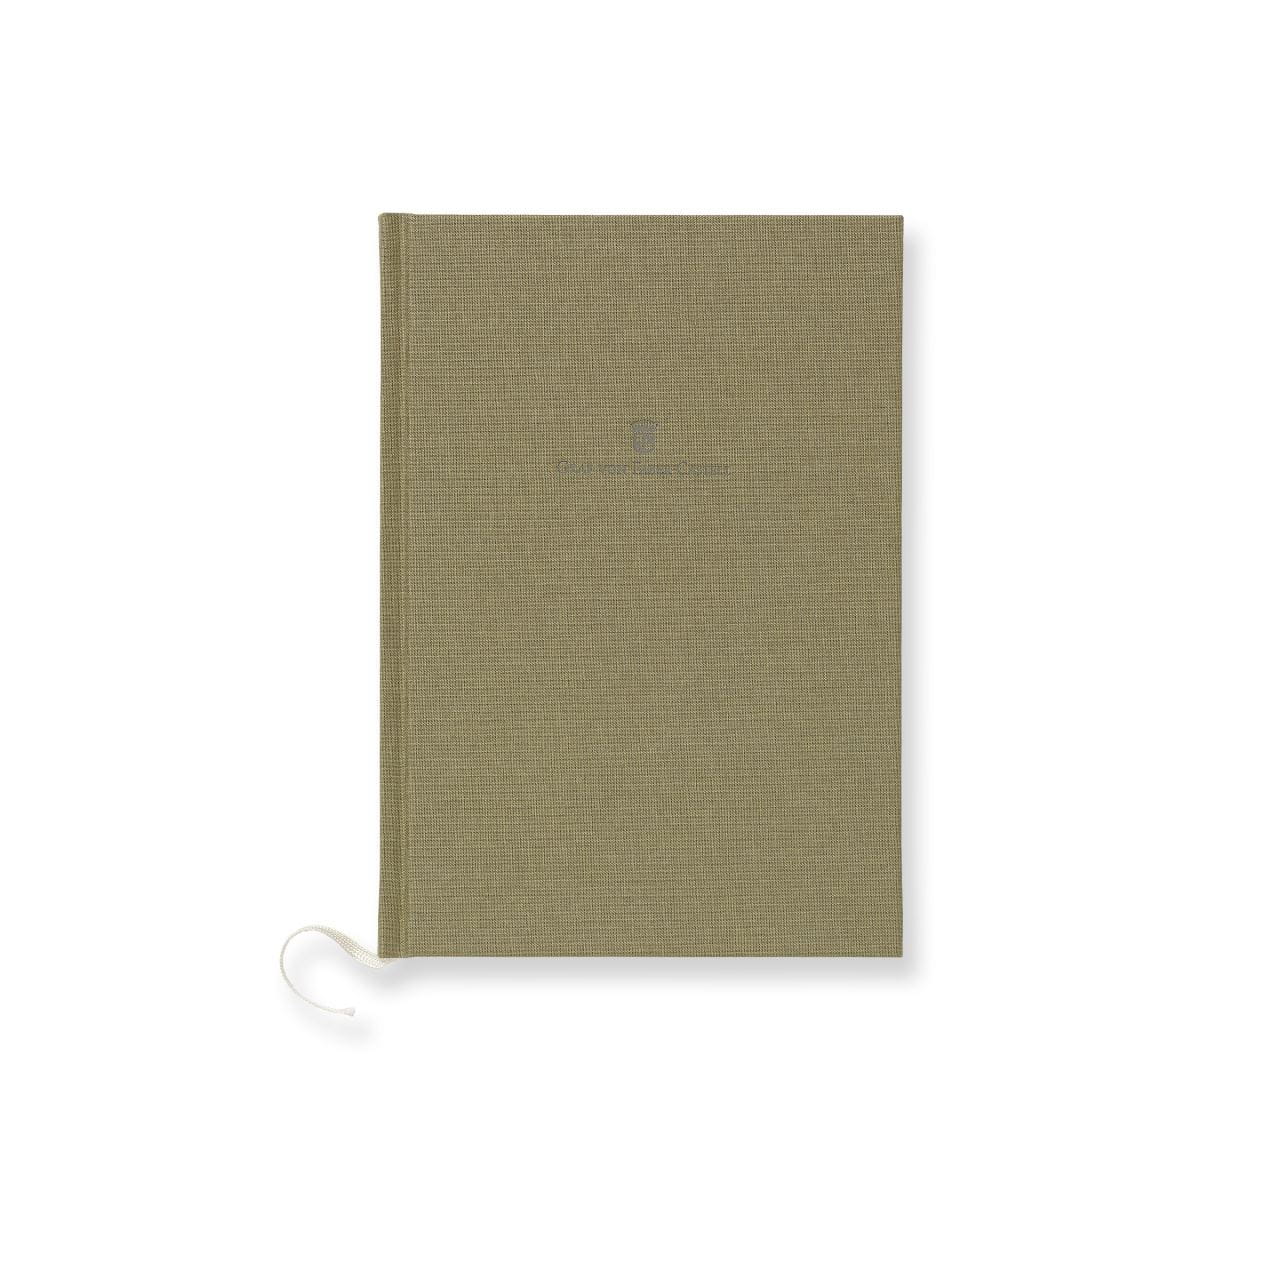 Graf-von-Faber-Castell - Notebook with linen cover A5 Olive Gr.